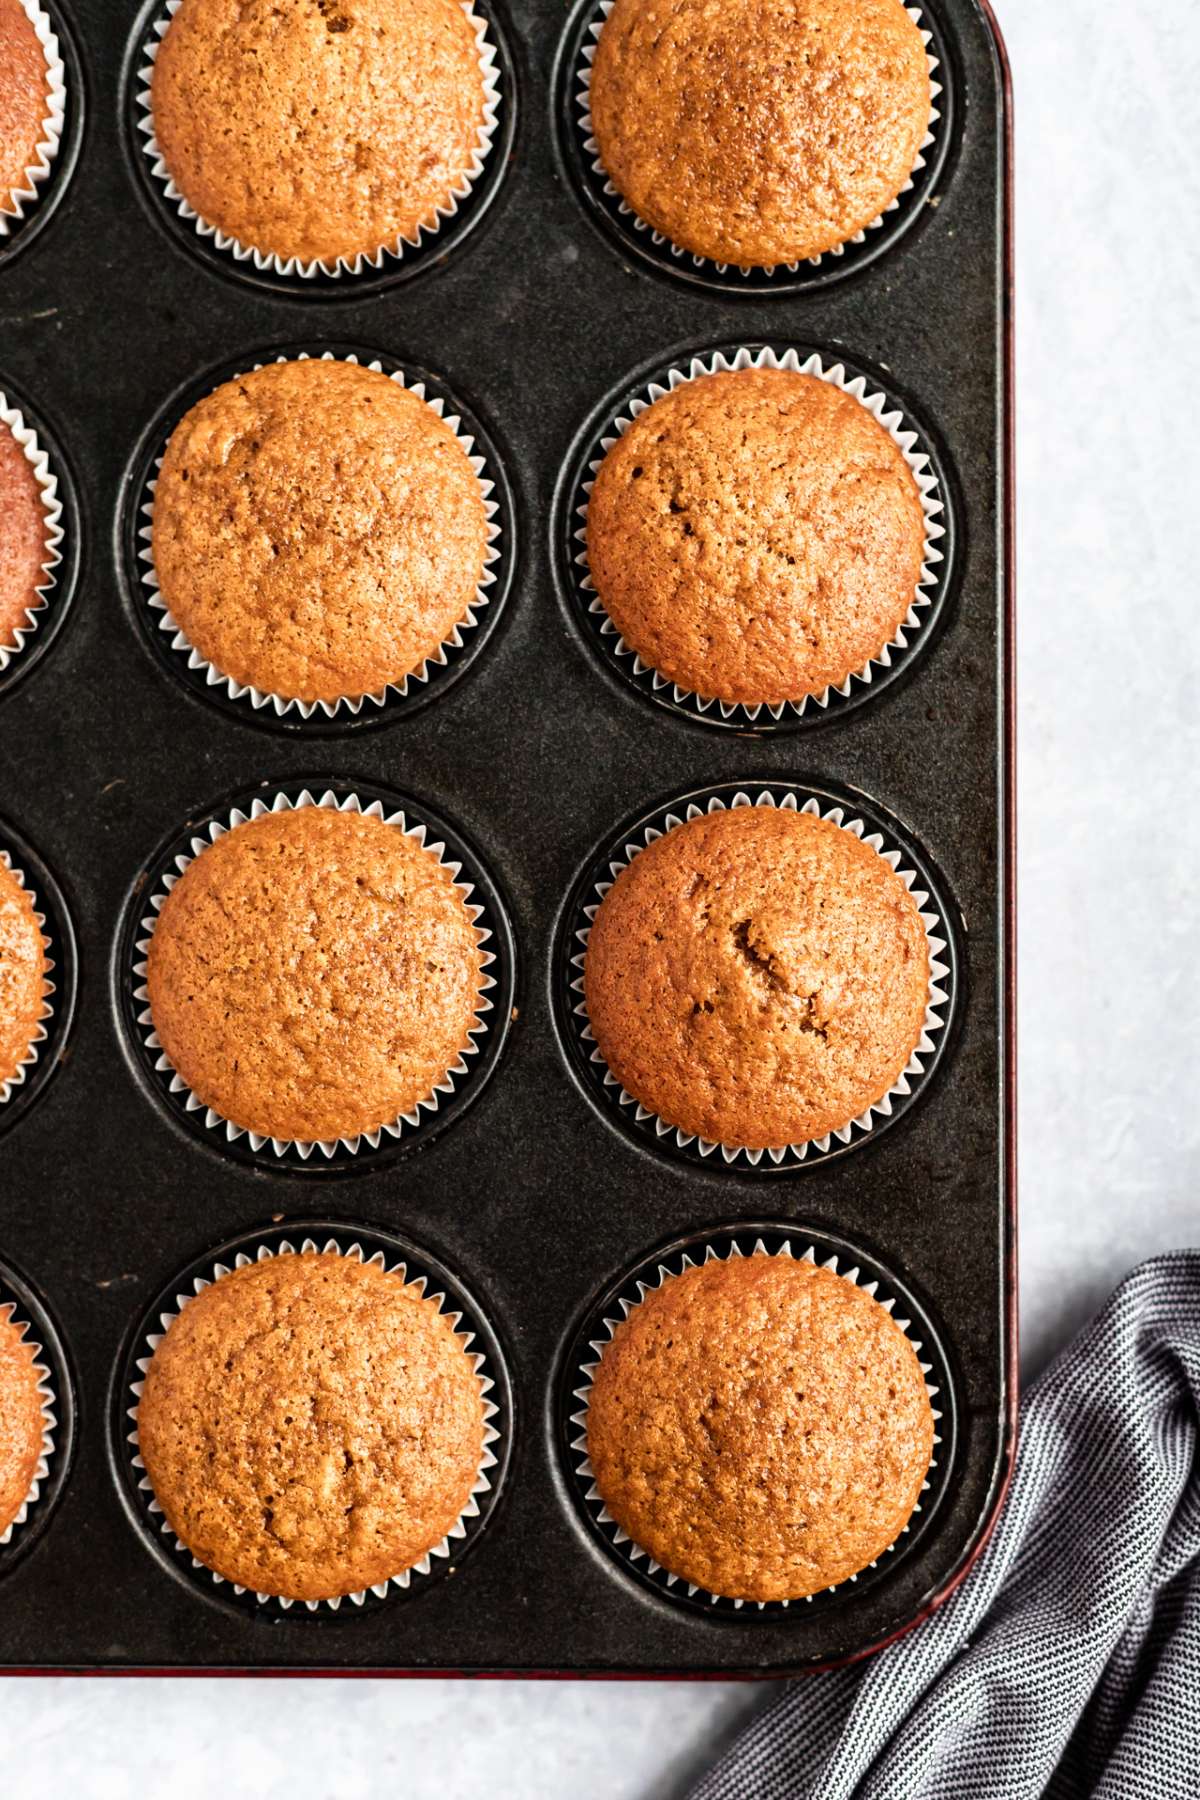 Baked pumpkin cupcakes in a muffin tin.